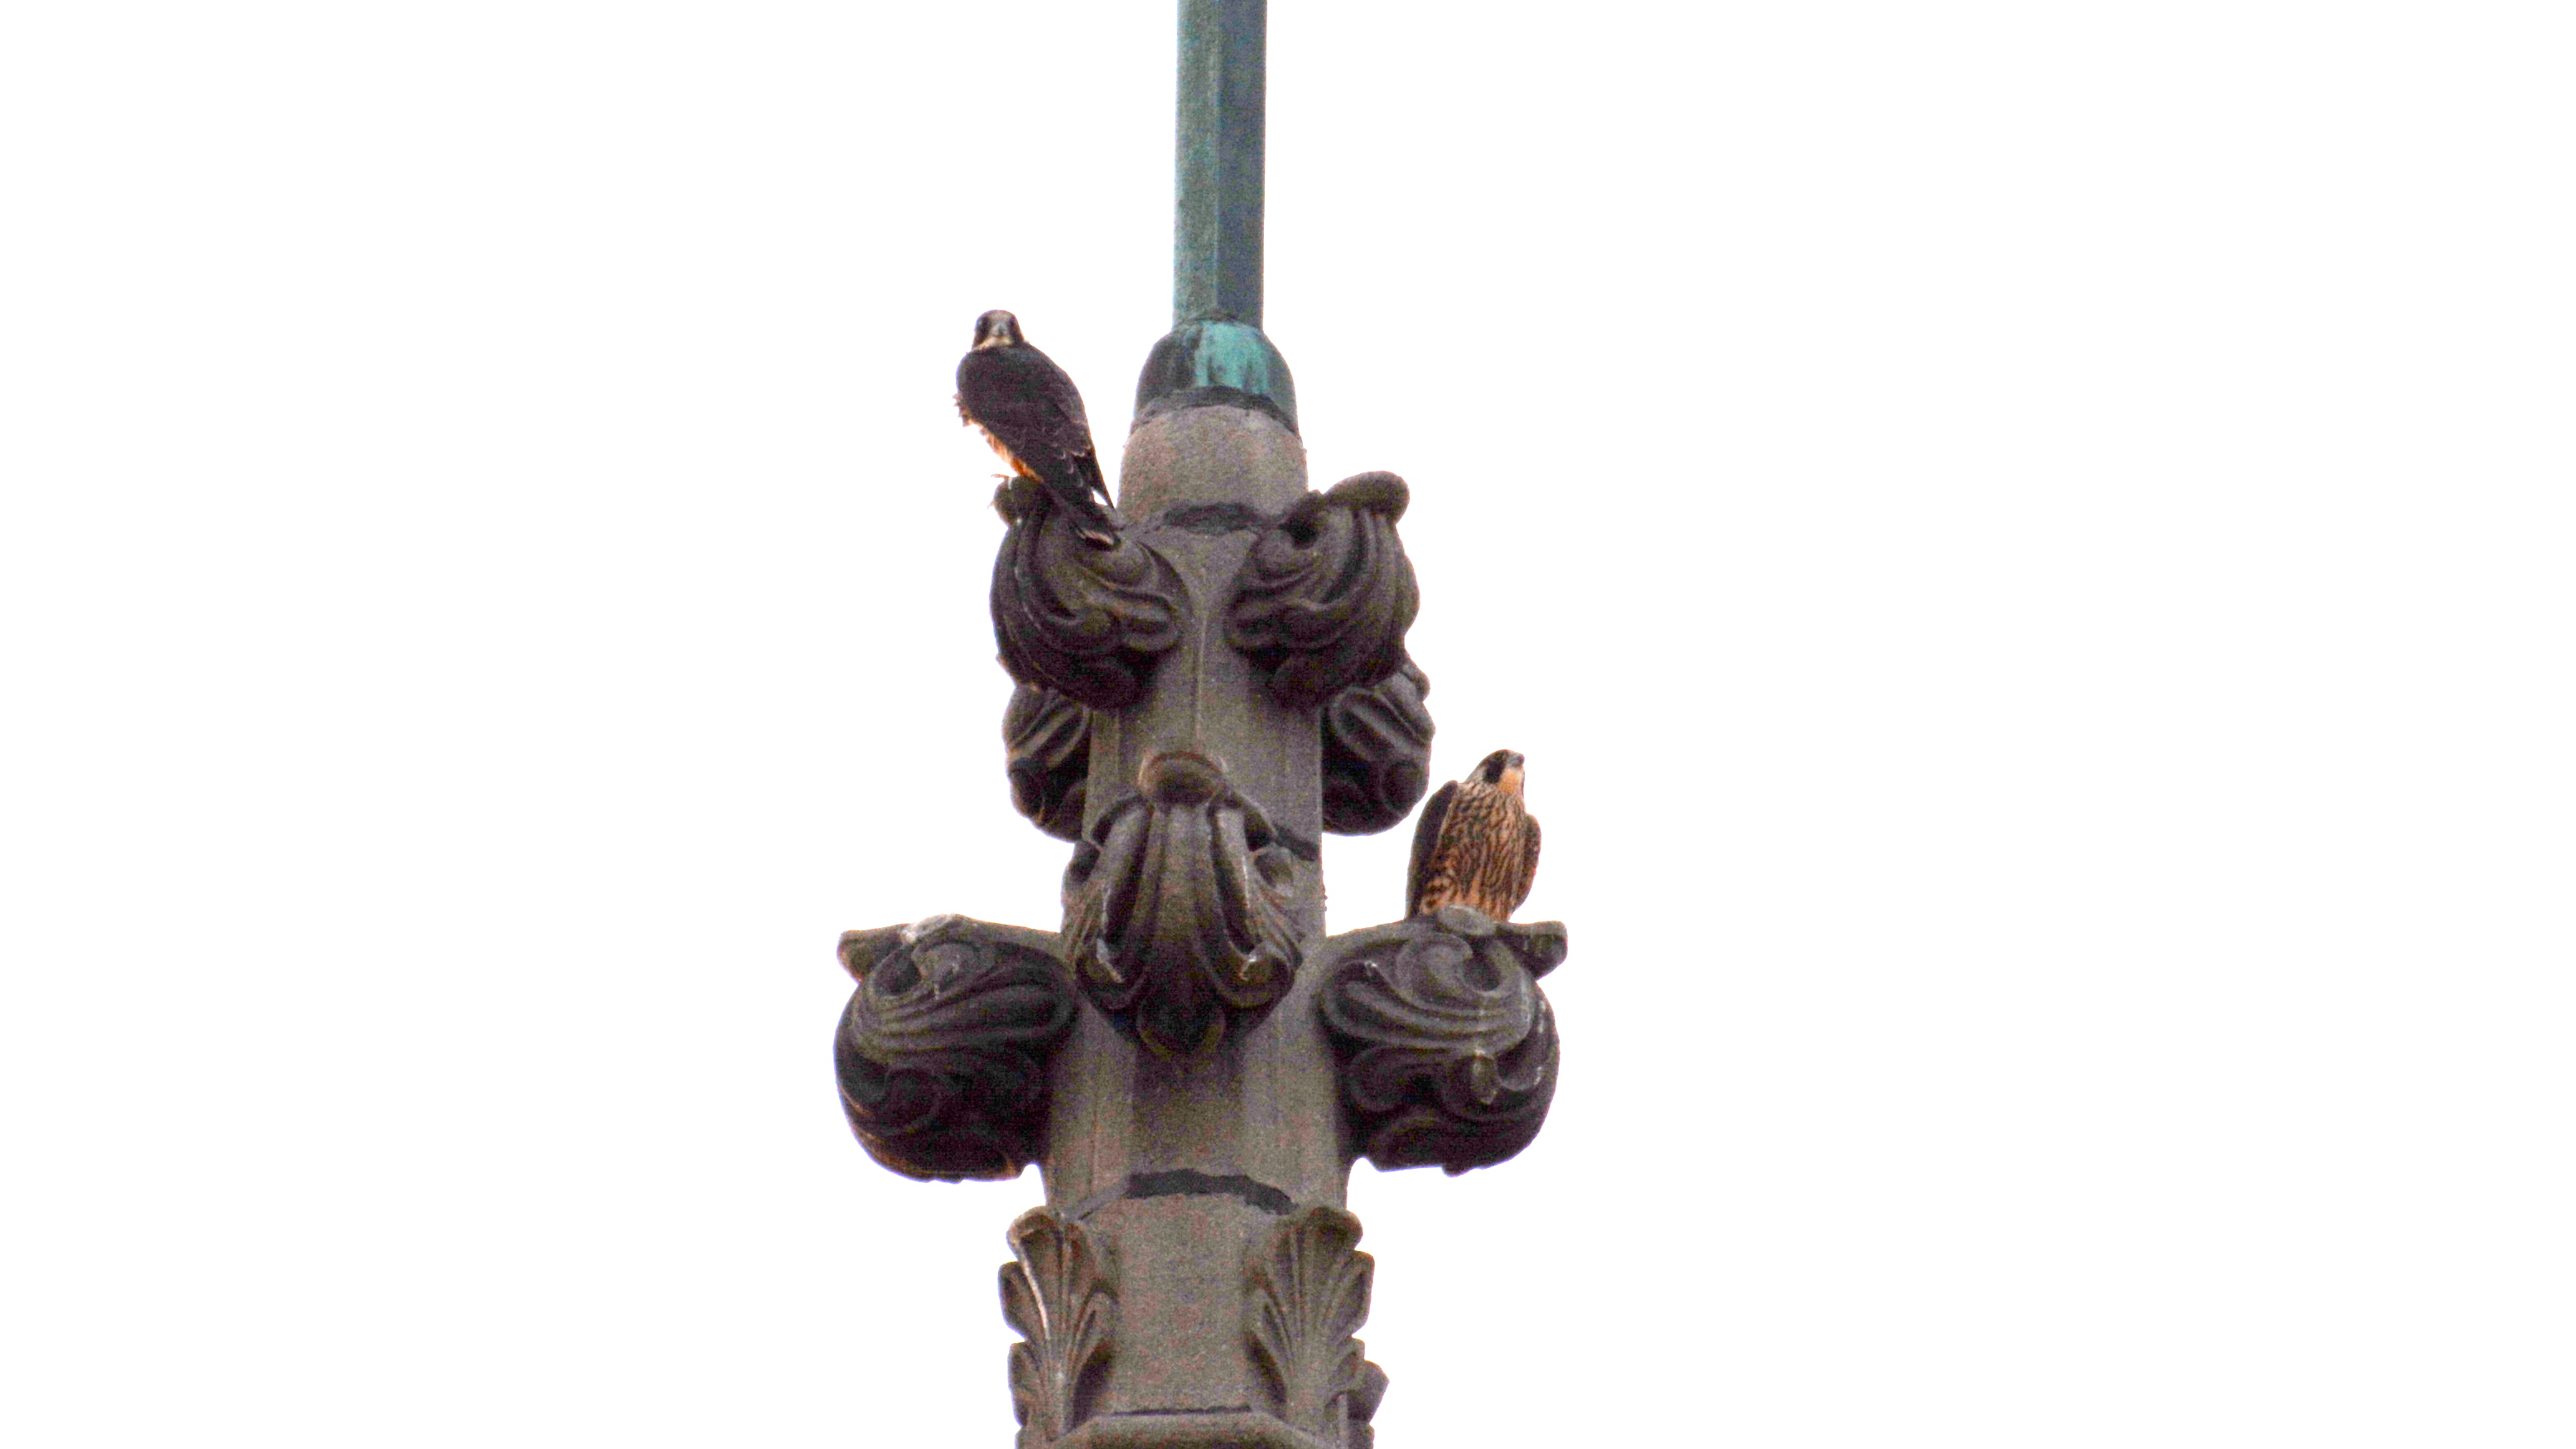 Perched on top of the steeple